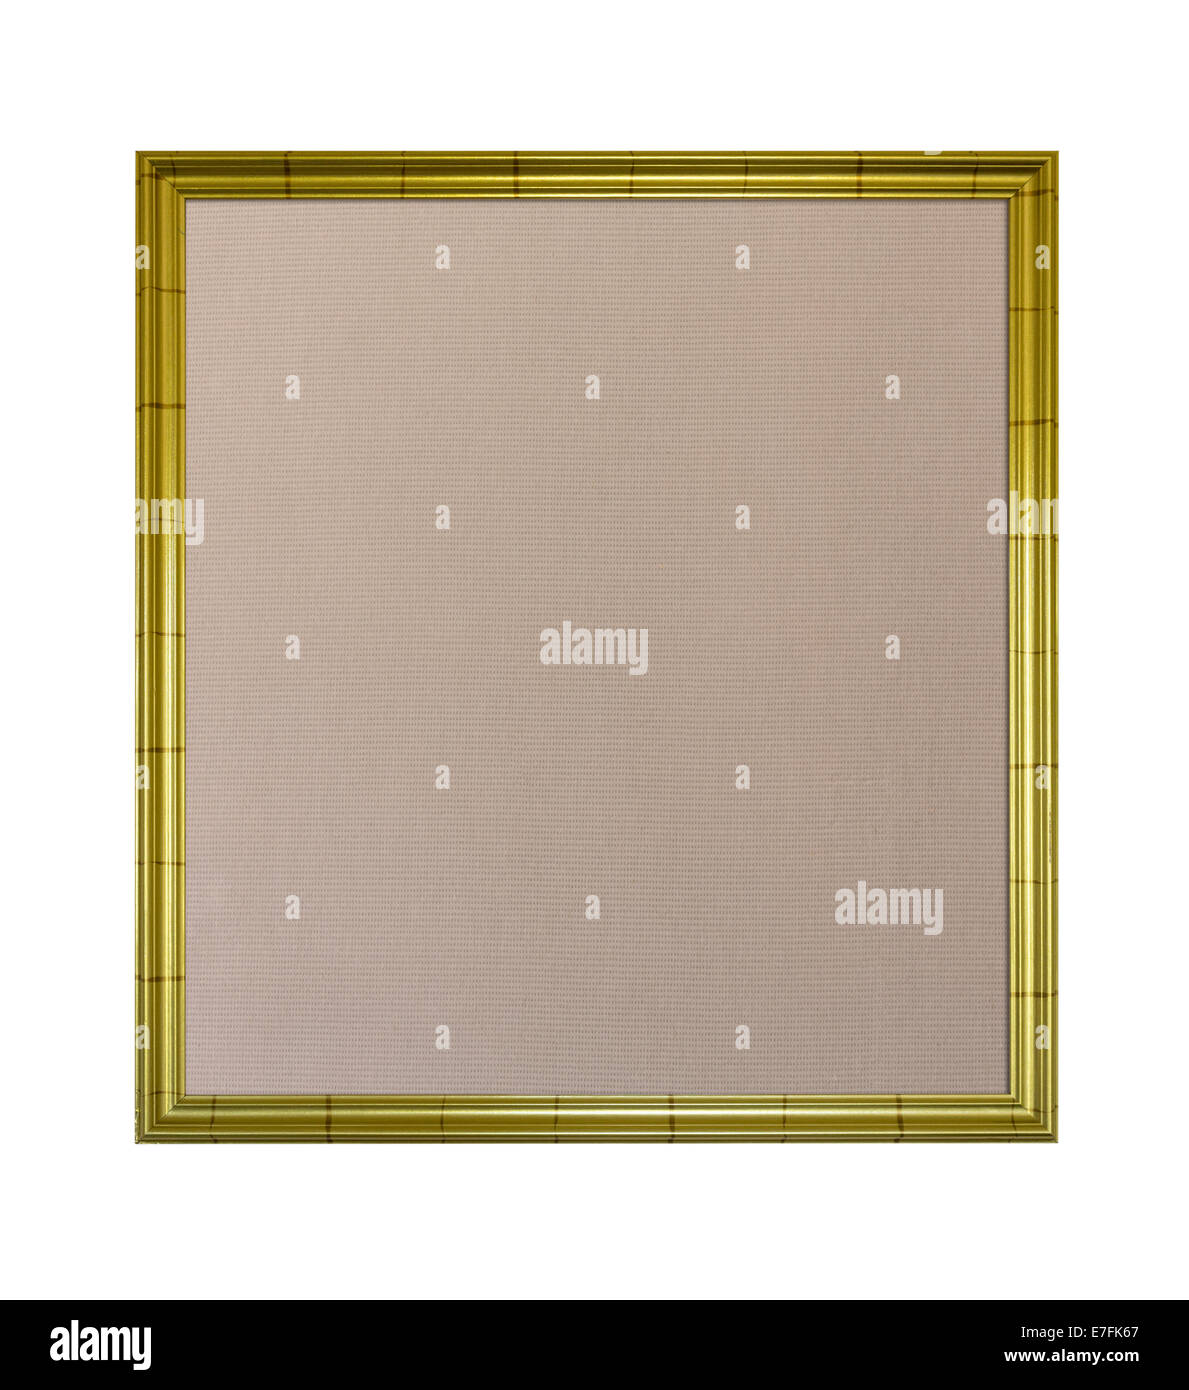 Cloth based pinboard or notice board inside a gold painted ornate picture frame isolated against white background Stock Photo